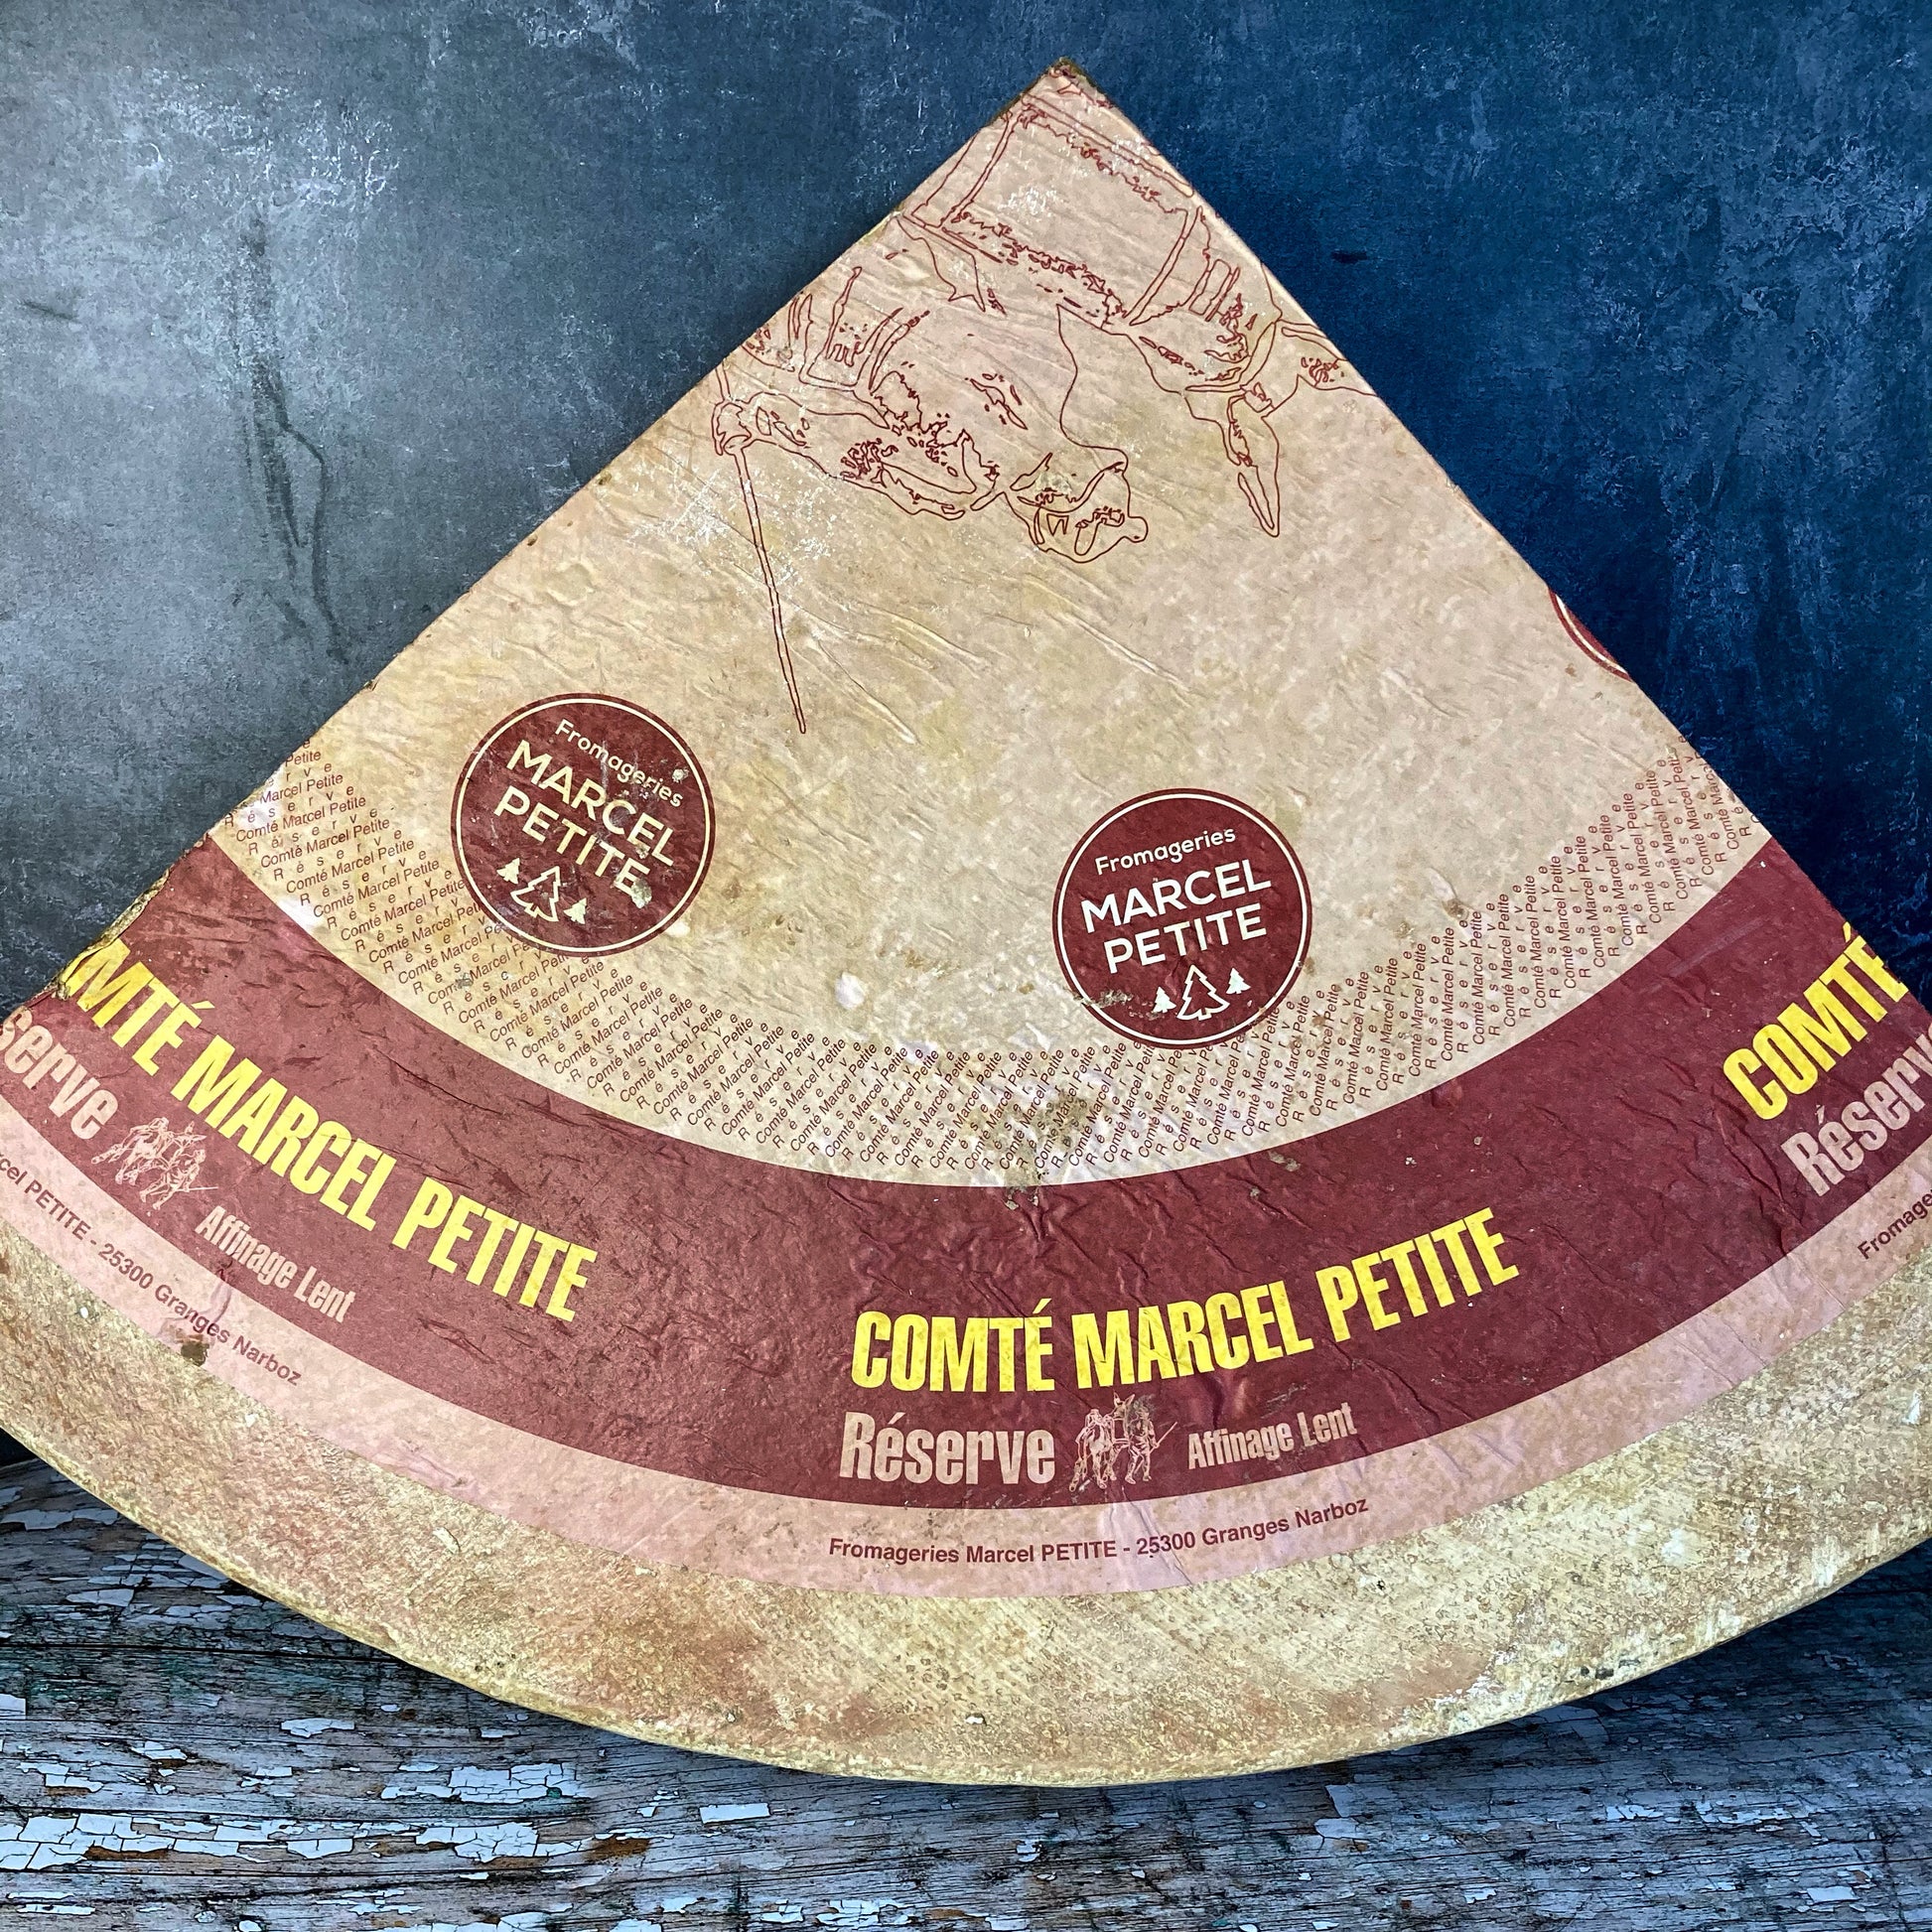 An enormous quarter of Comtè cheese, with it's distinctive red band of Marcel Petite, and the Green bell denoting it as Comtè extra.